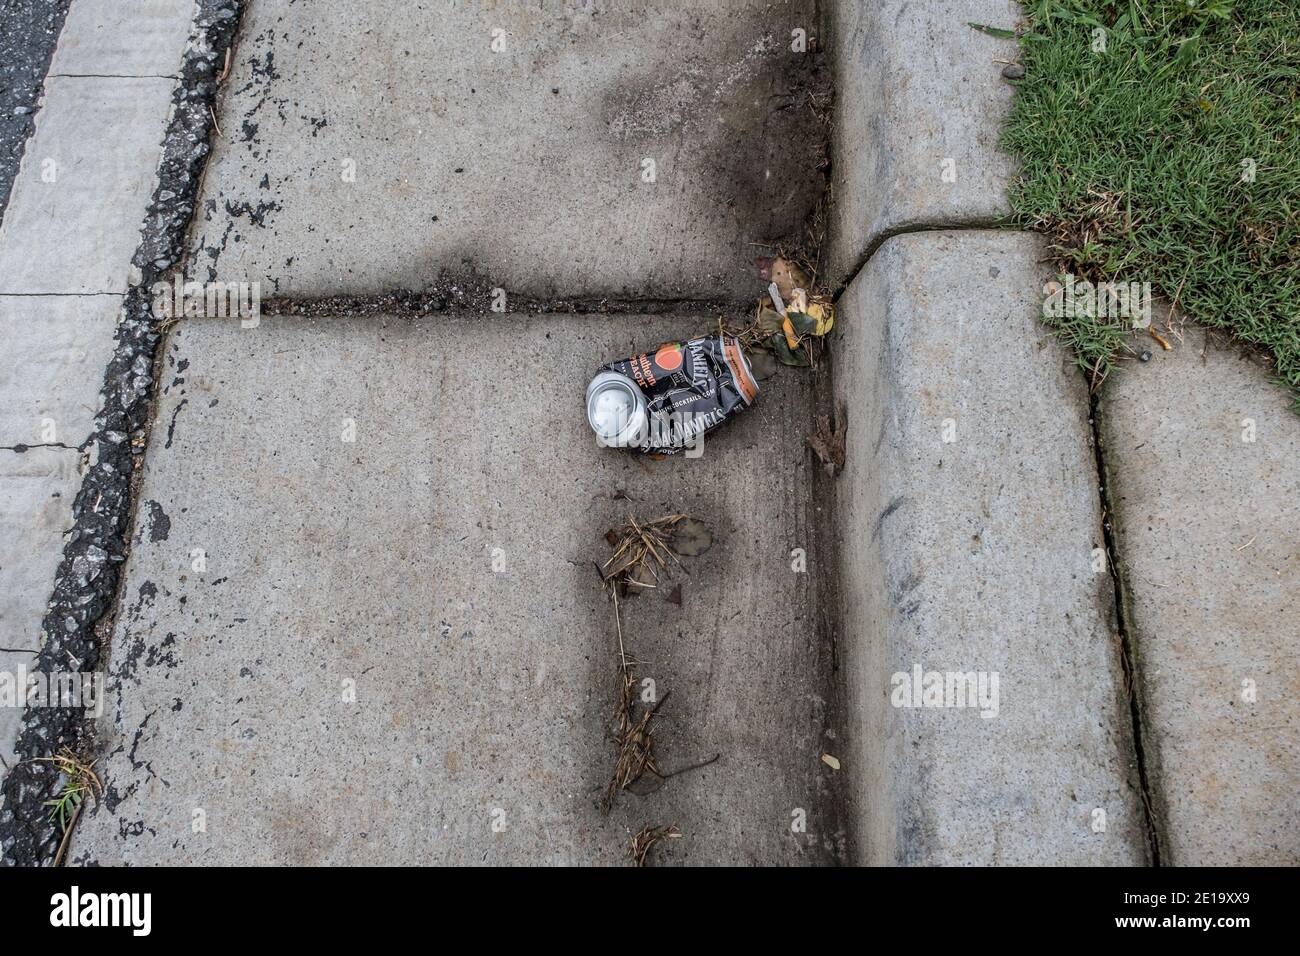 Discarded Jack Daniel's can crushed and thrown aside laying on the cement curb alongside the road polluting the environment Stock Photo